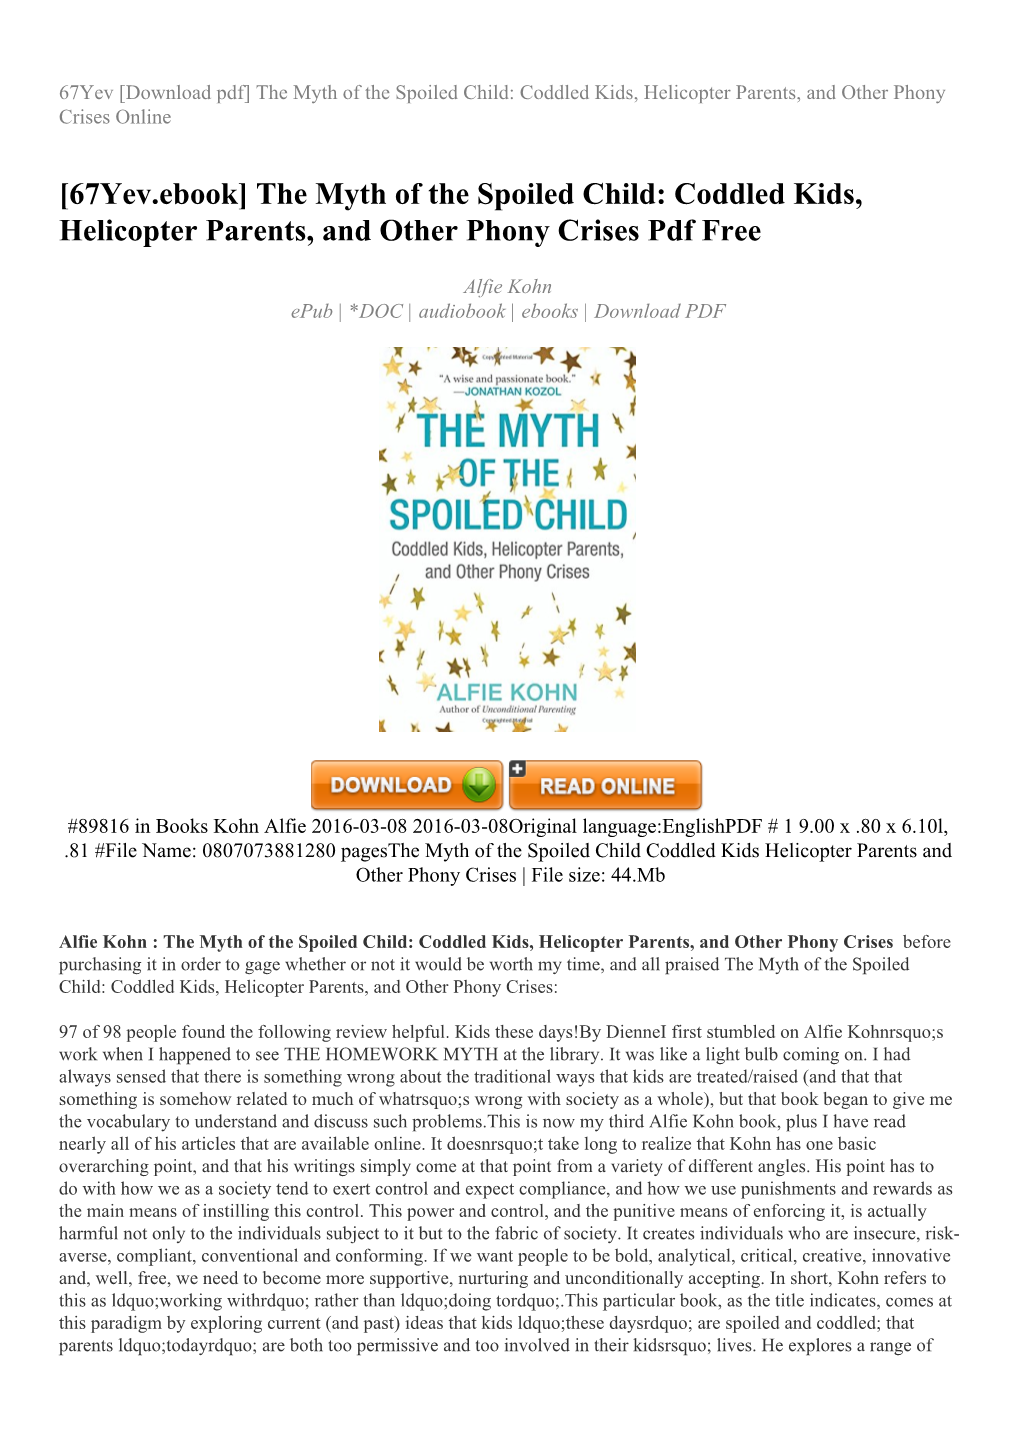 The Myth of the Spoiled Child: Coddled Kids, Helicopter Parents, and Other Phony Crises Online